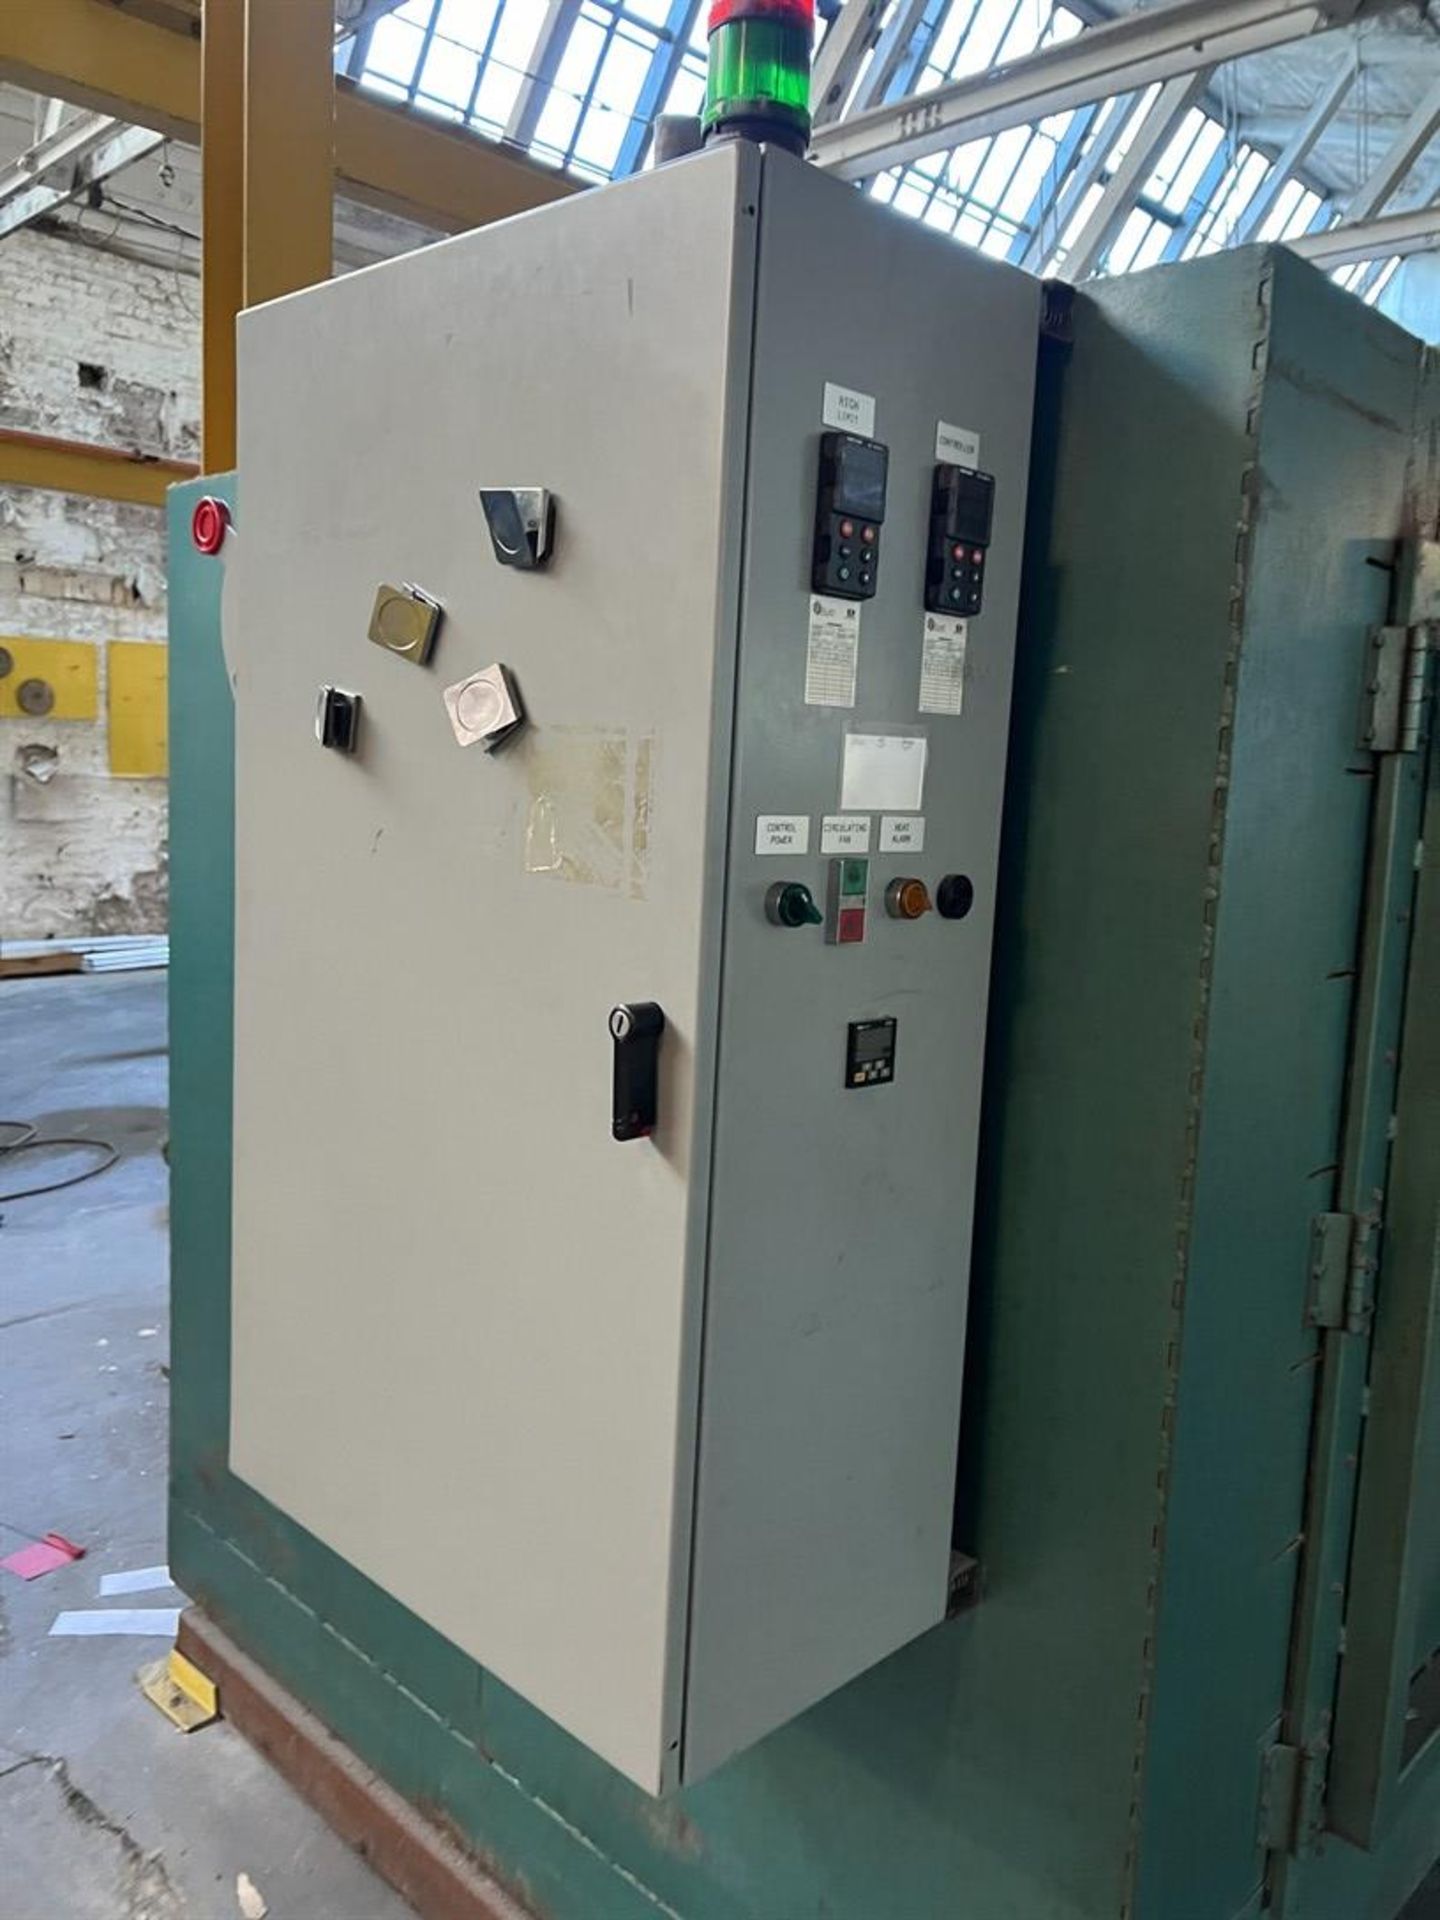 TRENT 30kW Electric Batch Oven, s/n 912-829, 1400 F Max Temp, 48” x 48” x 48” Oven Area, 3-PH - Image 6 of 6